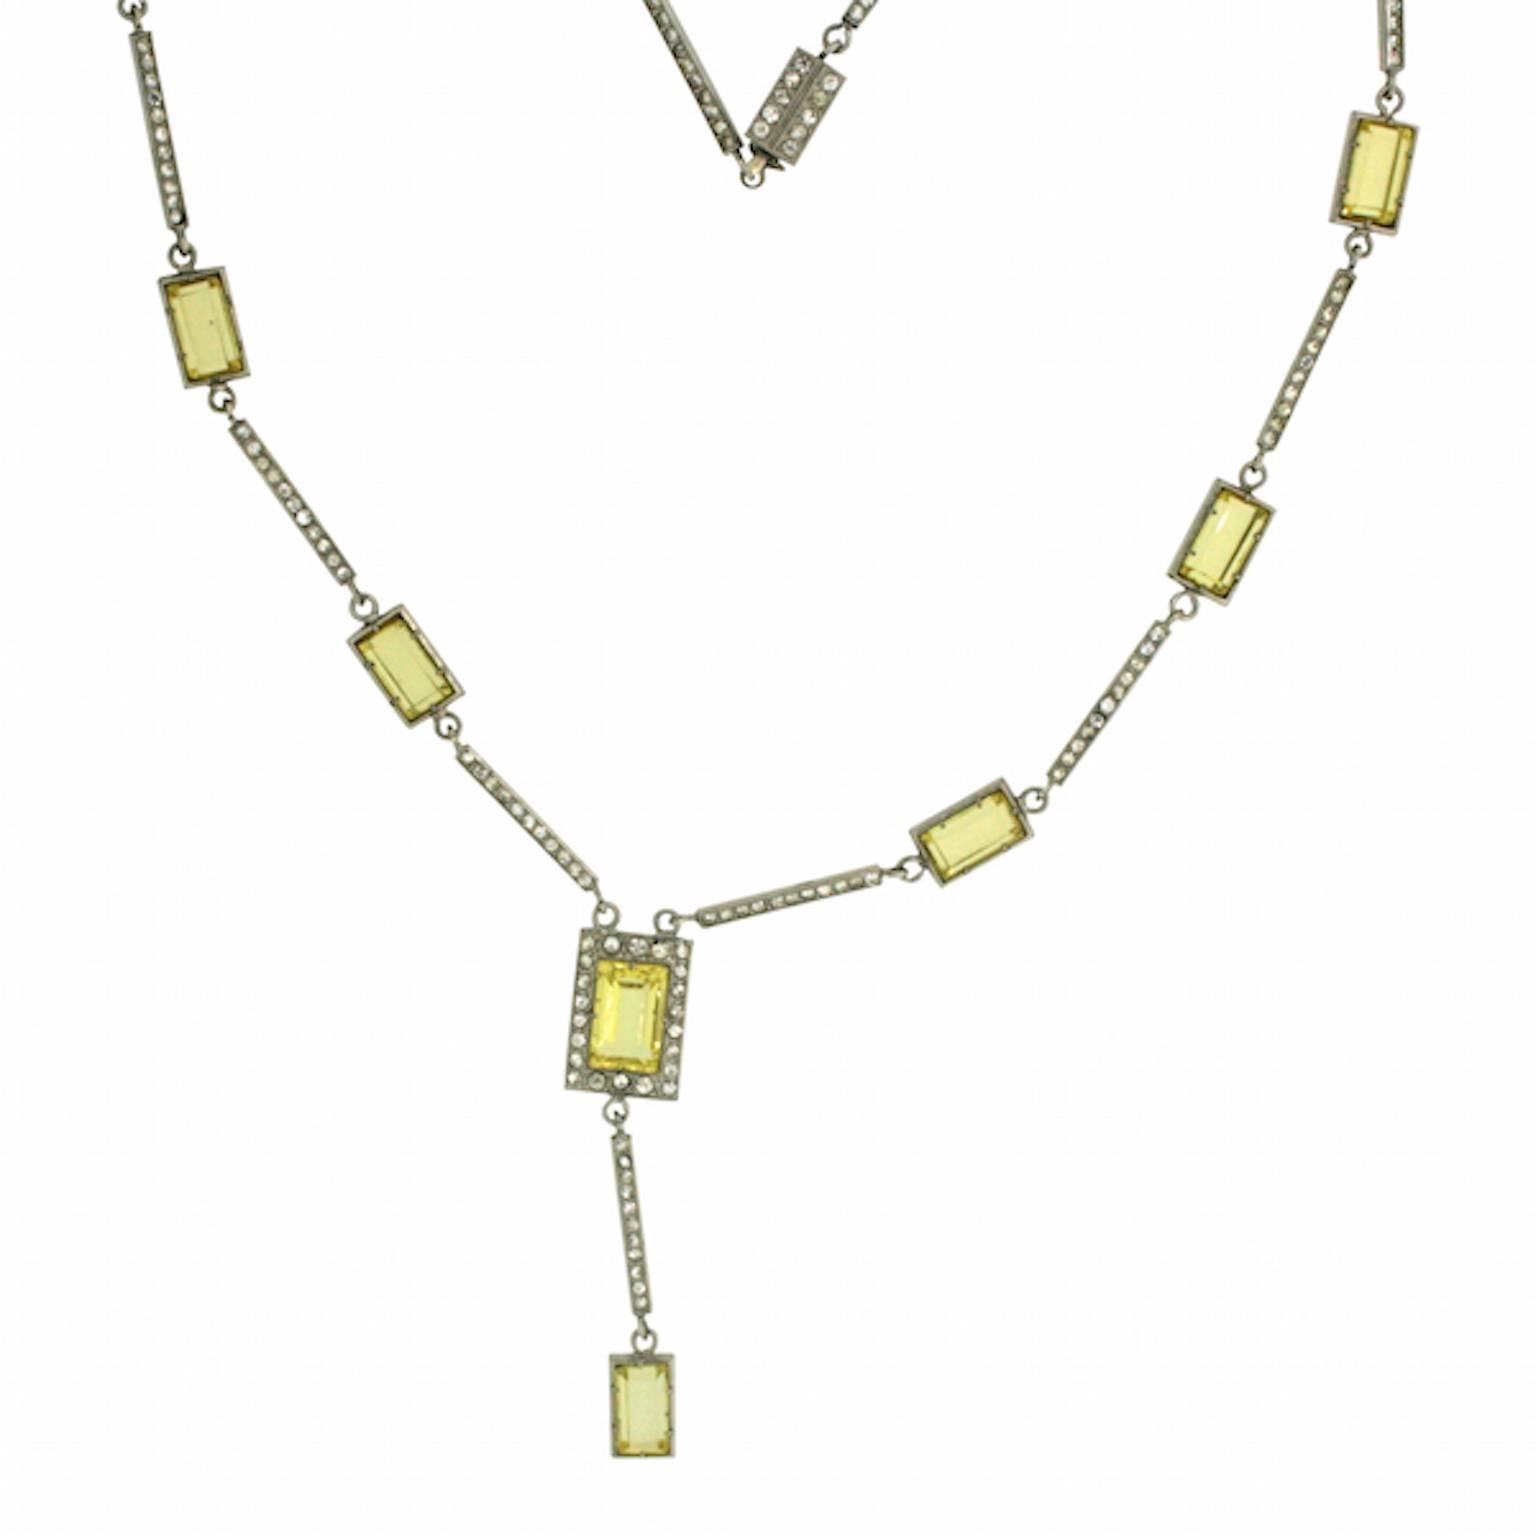 This elegant necklace necklace dates from the 1920s. Although unsigned, this piece is beautifully crafted and timeless.
Condition Report:
Excellent

The Details...
This necklace, although unmarked, is likely to be silver. It features lengths of